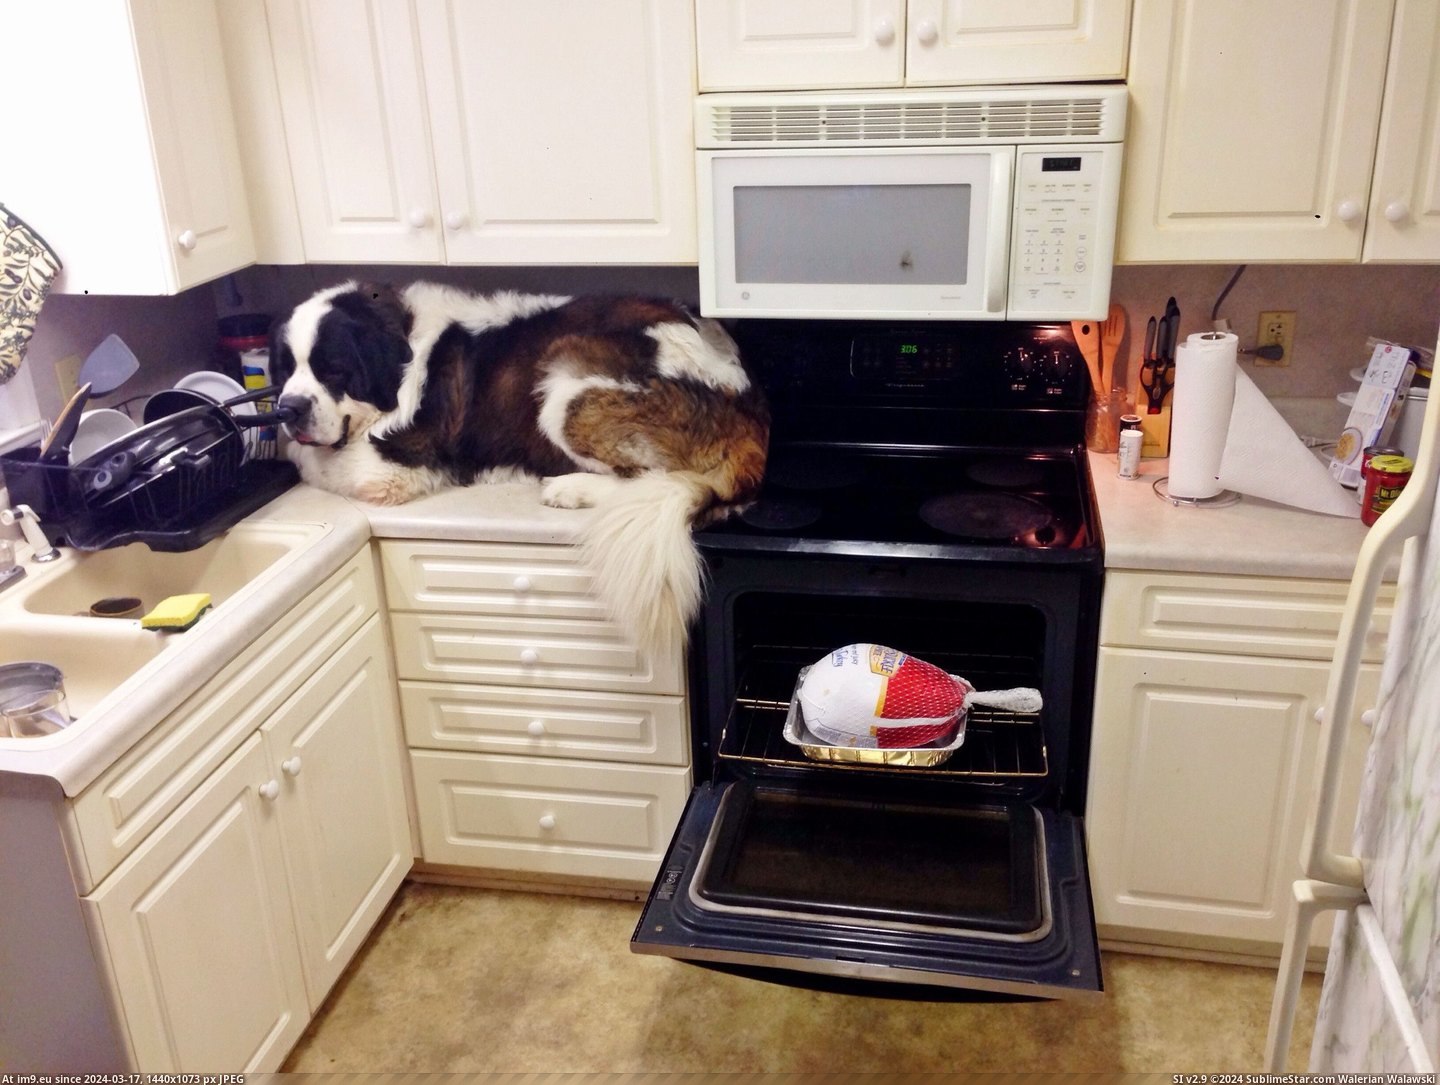 #Funny #Had #Him #Counter #Habit #Jub #Weirdo #Caught #Laying #Realize [Funny] After I caught him on the counter, I started to realize Jub Jub has always had a habit of laying down like a weirdo. 12 Pic. (Bild von album My r/FUNNY favs))